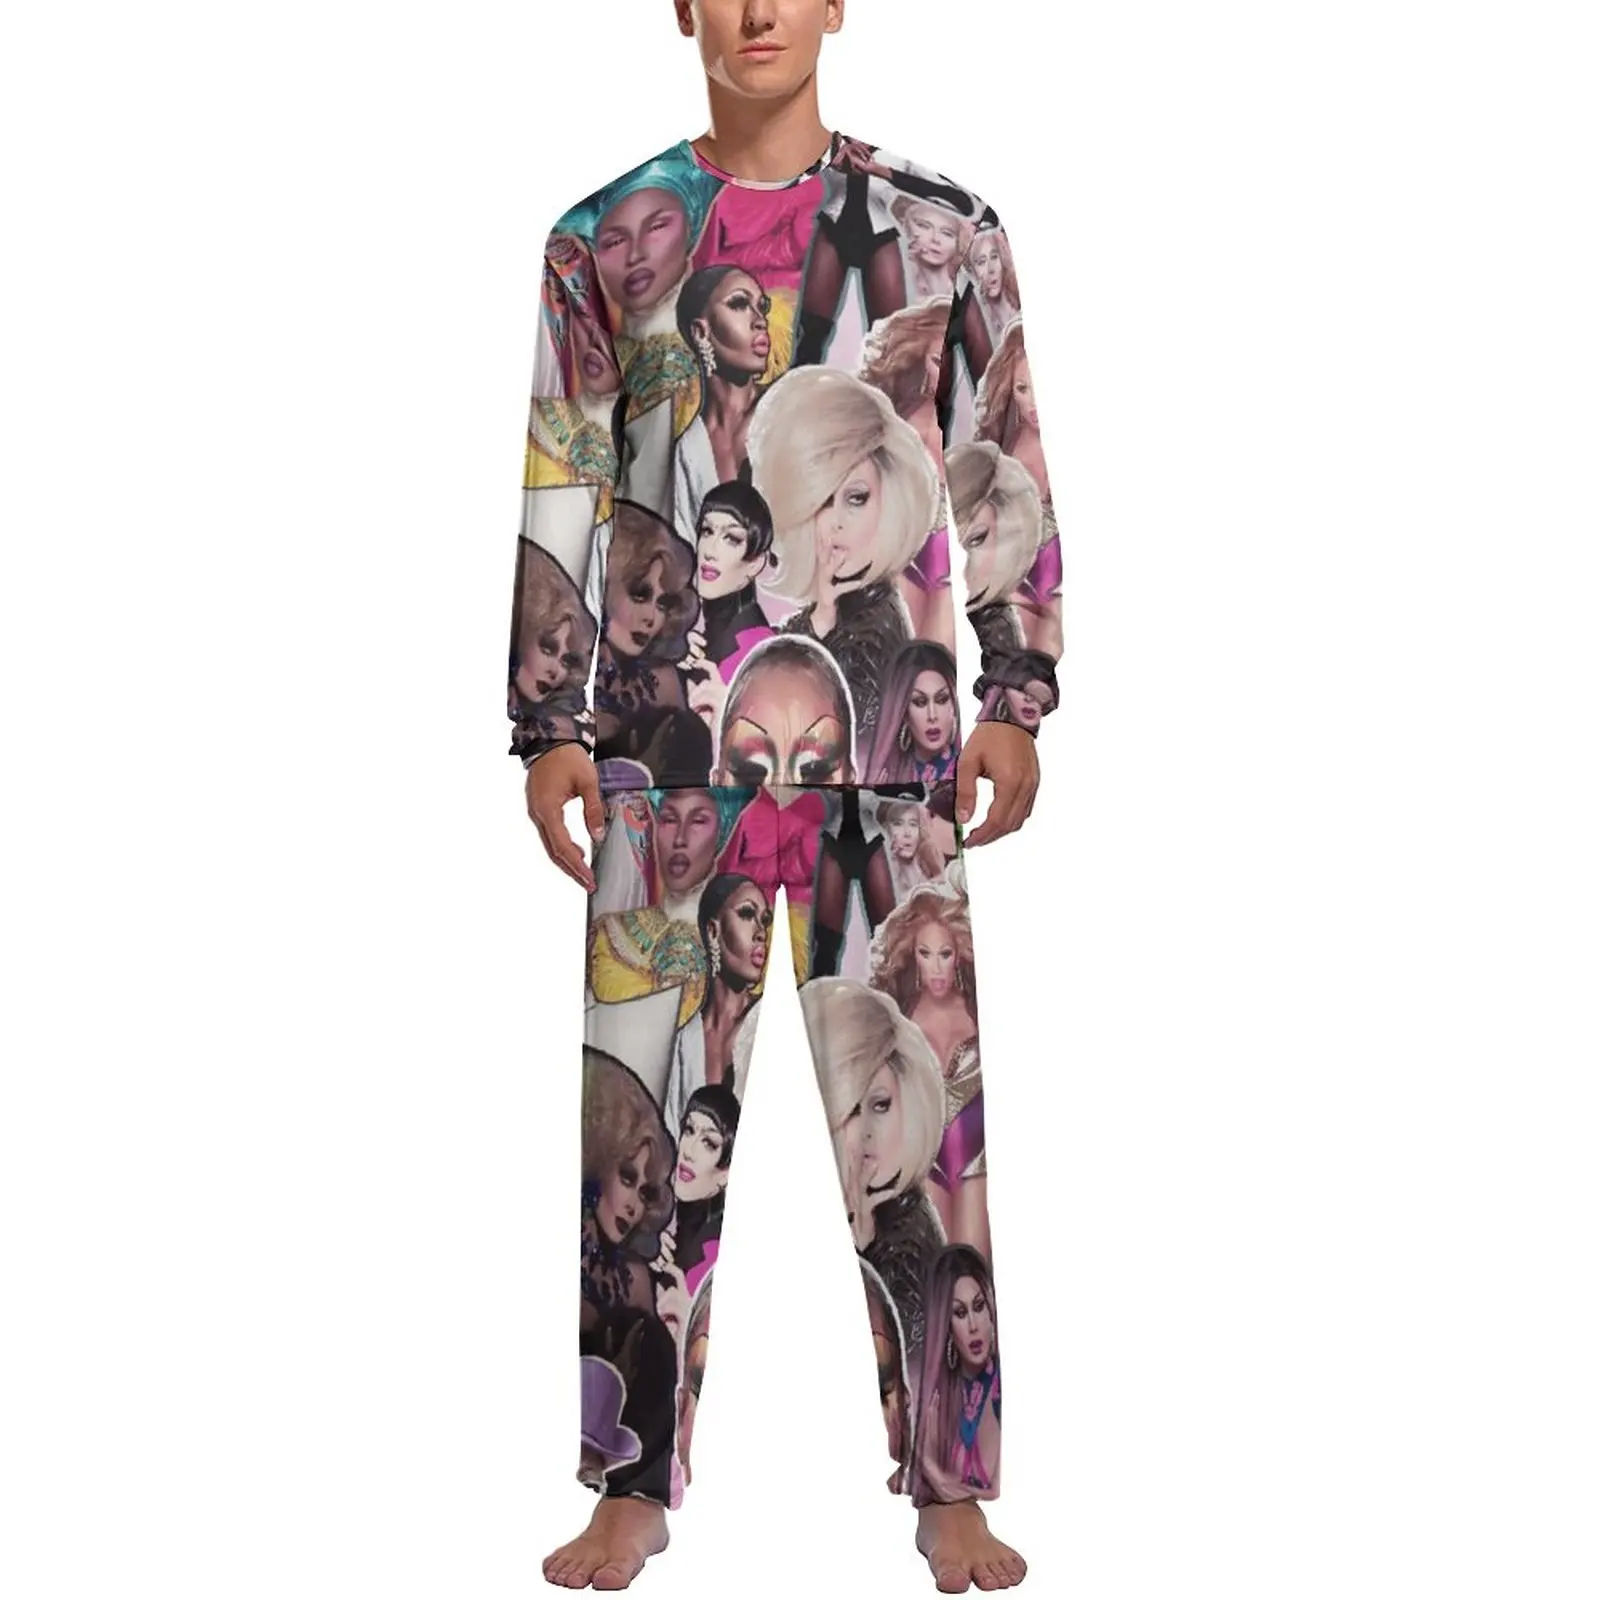 Drag Queen Collage Pajamas Daily Funny Meme Aesthetic Home Suit Man 2 Pieces Printed Long Sleeve Warm Pajama Sets